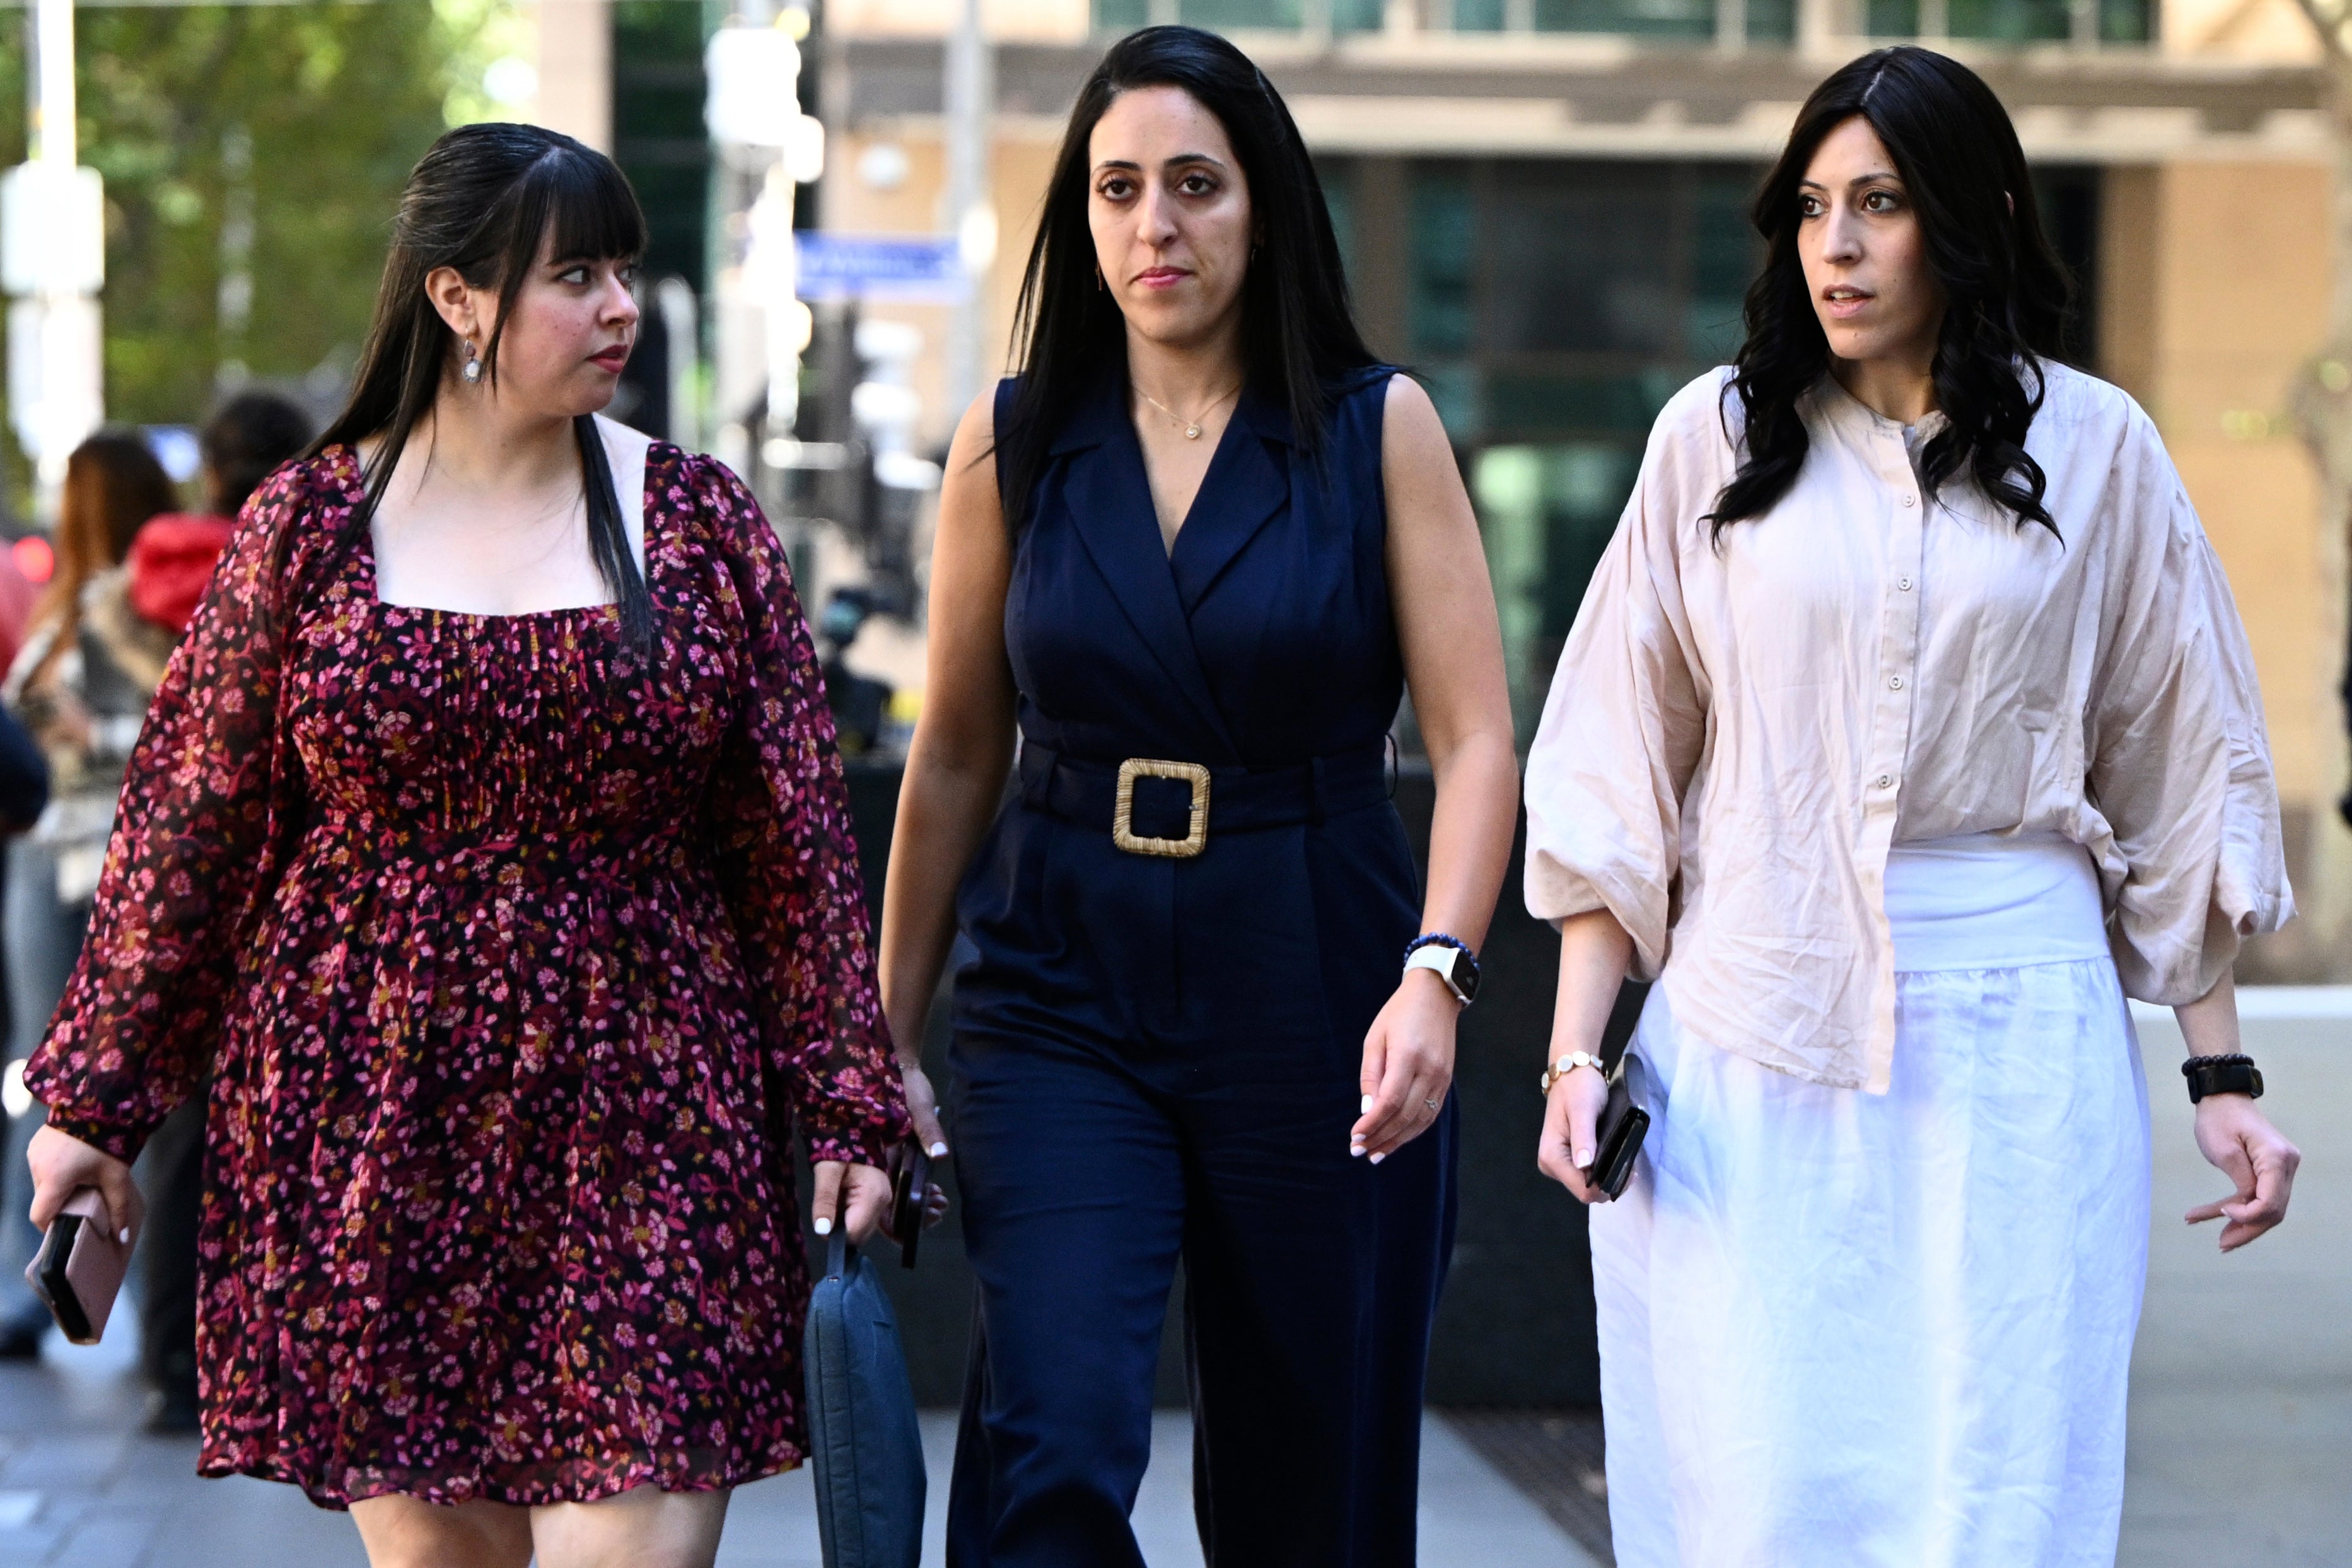 Malka Leifer Israeli ex-principal found guilty of sexually assaulting students at Jewish girls school in Australia The Independent picture pic